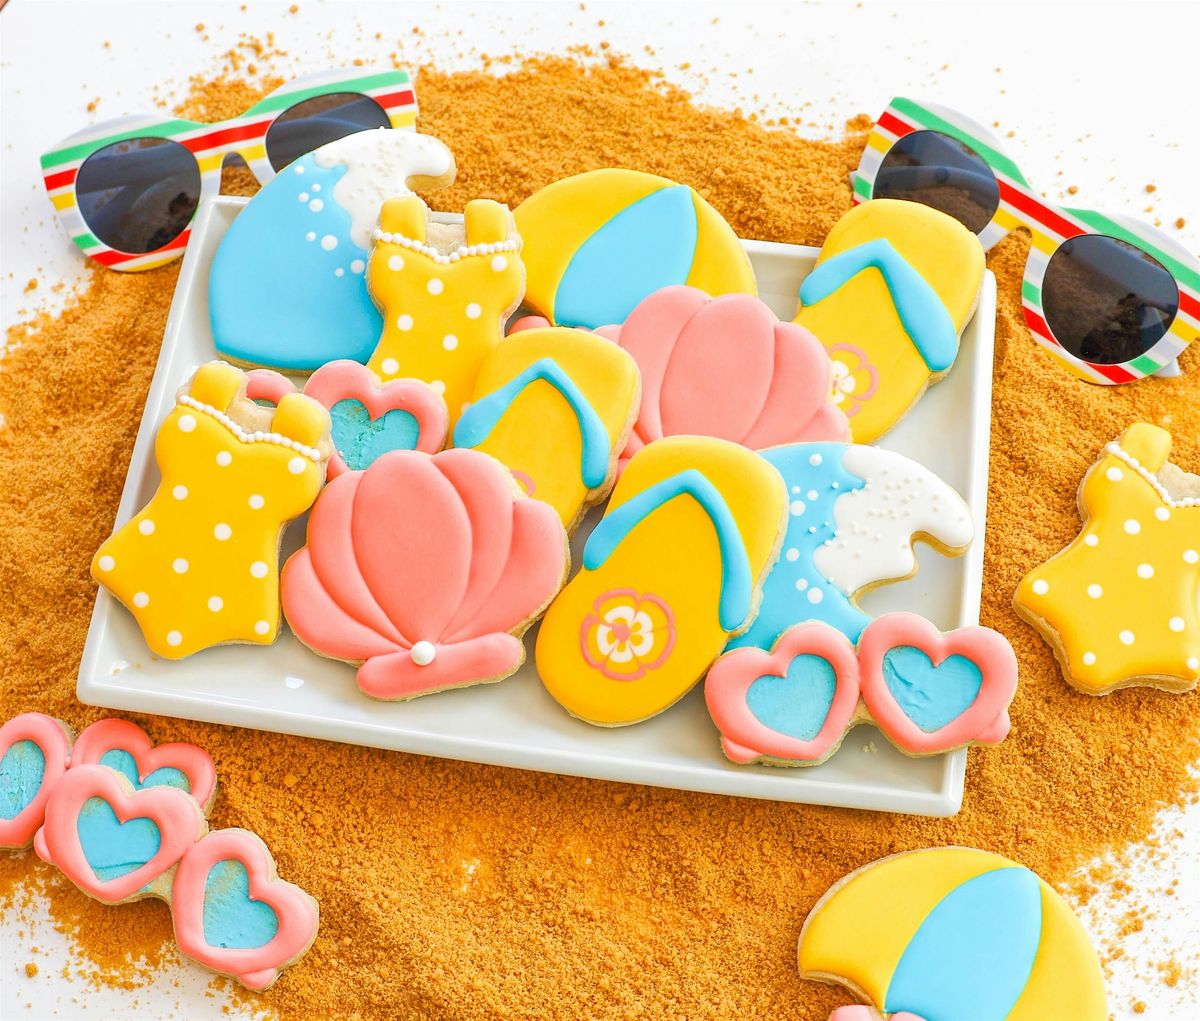 Sand and Sugar Cookie Decorating Class